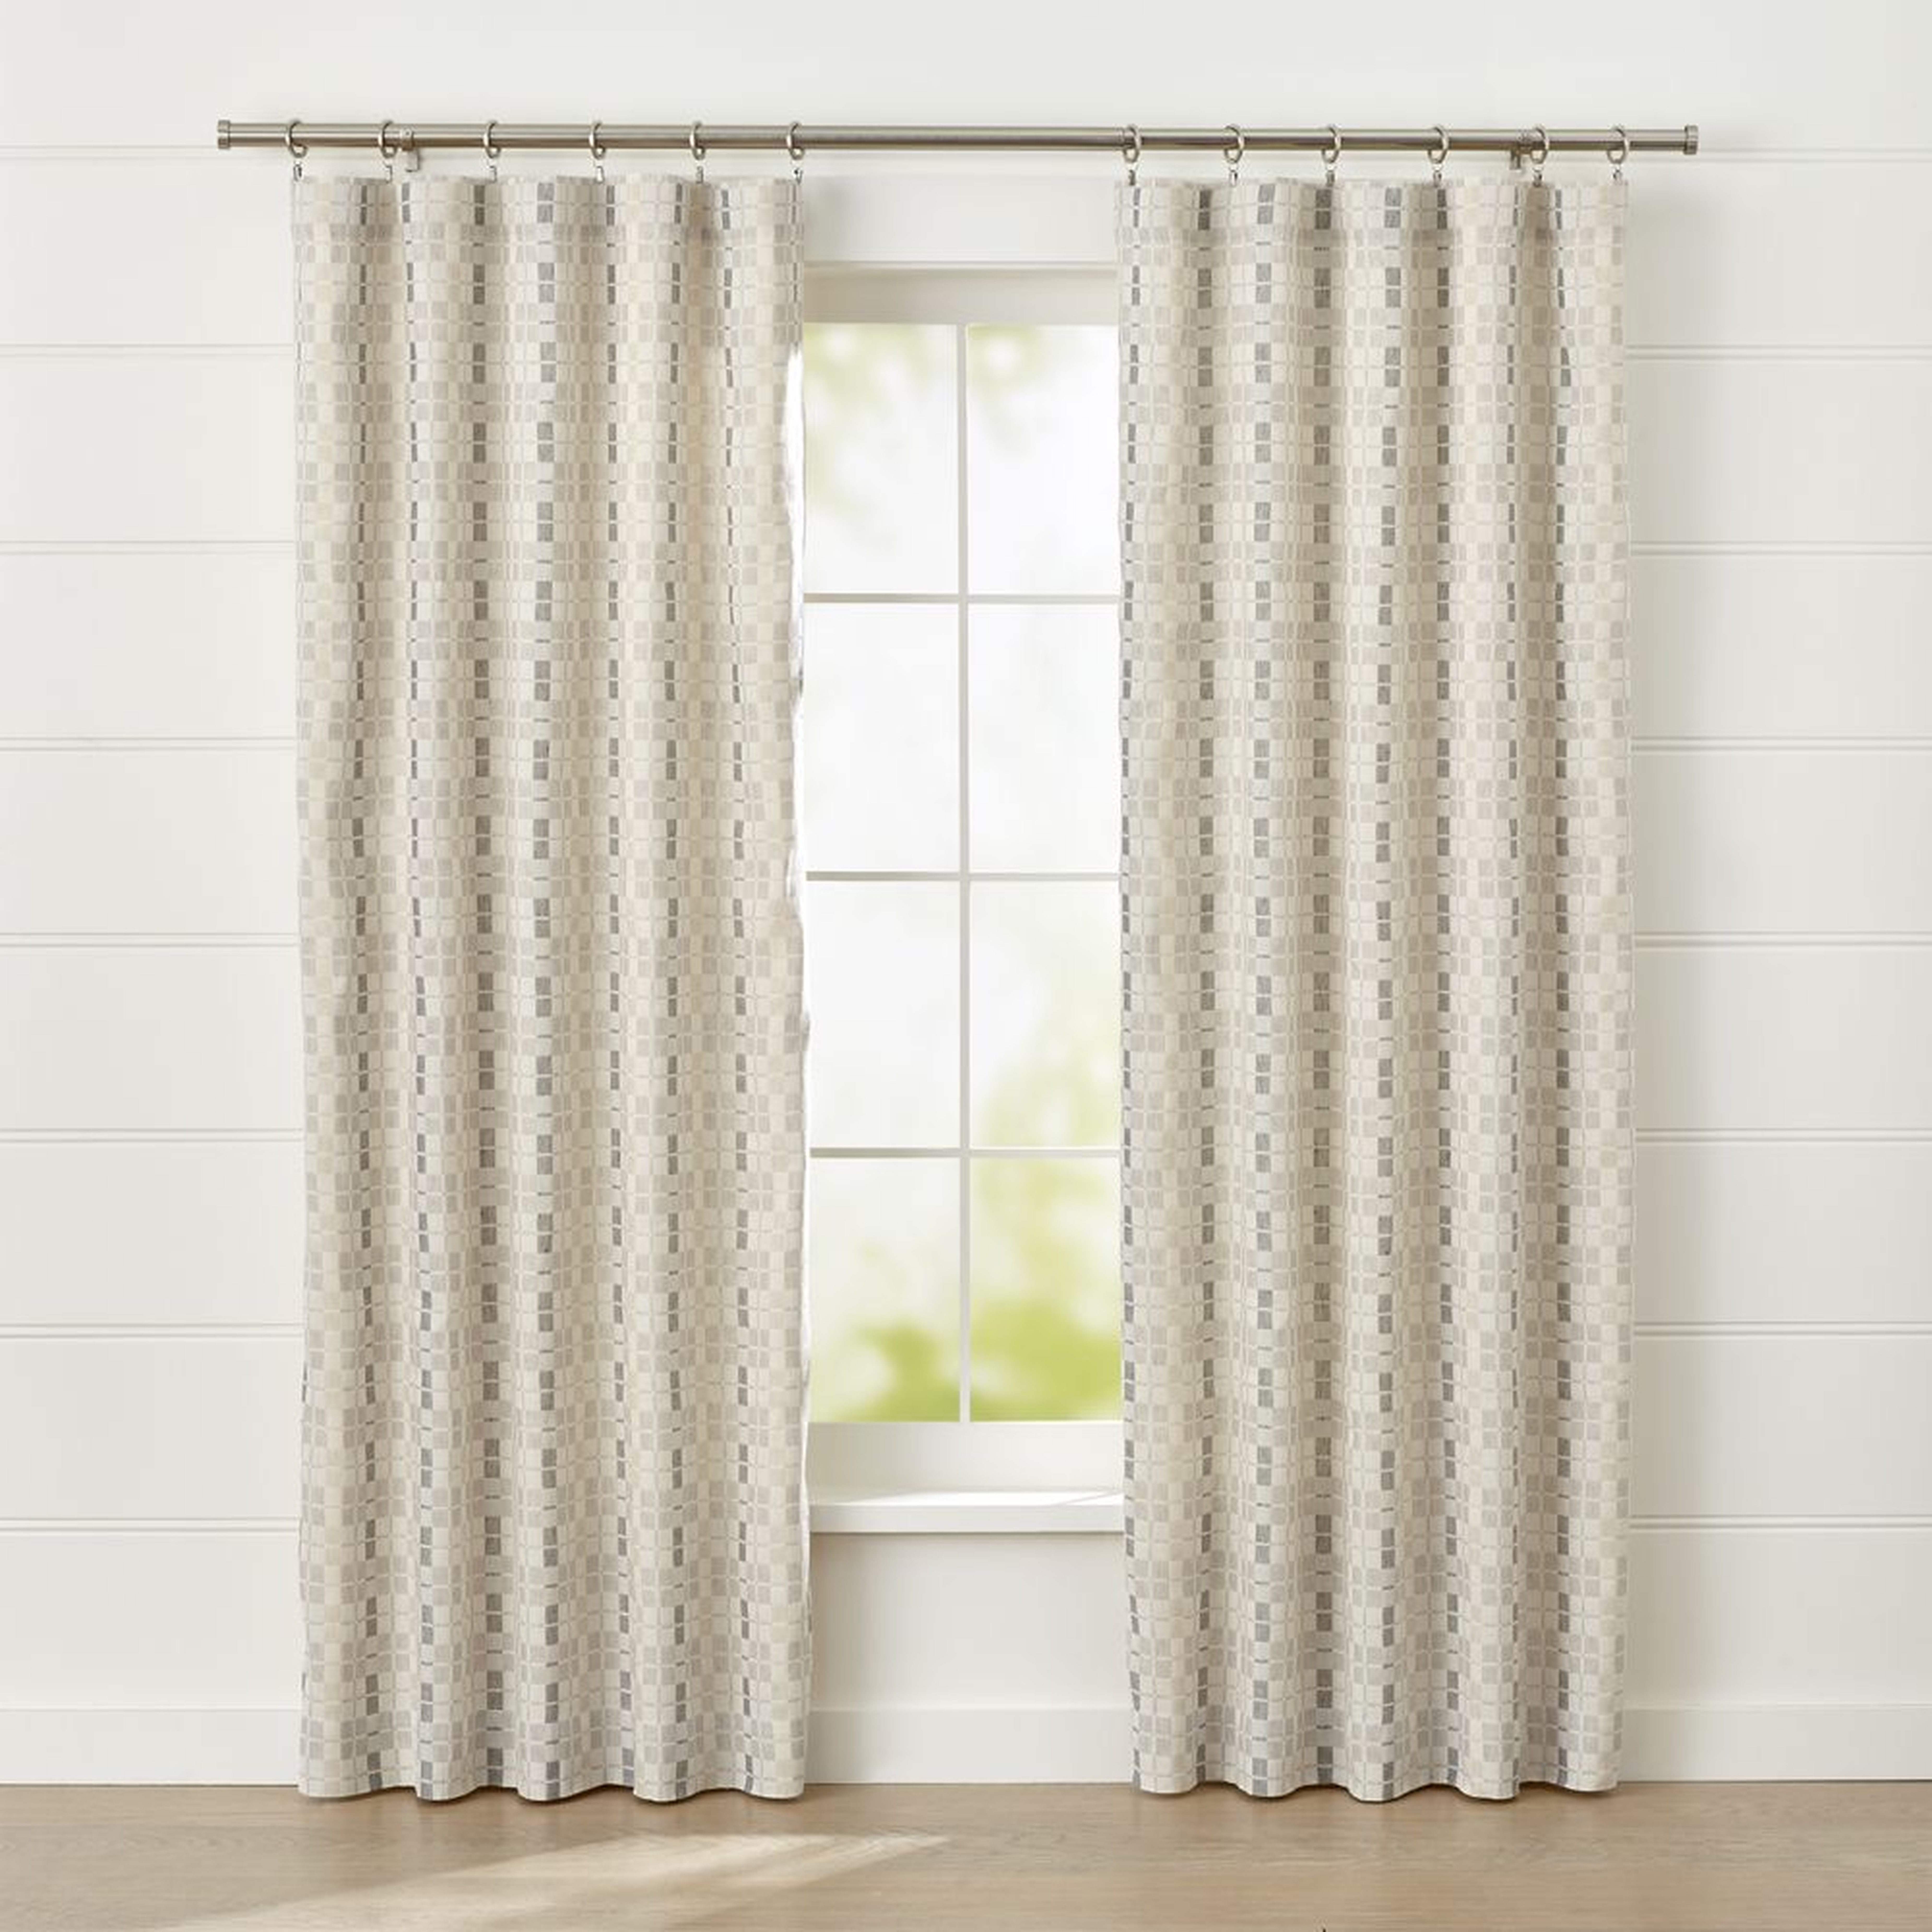 Pastore Neutral Curtain Panel 50"x96" - Crate and Barrel